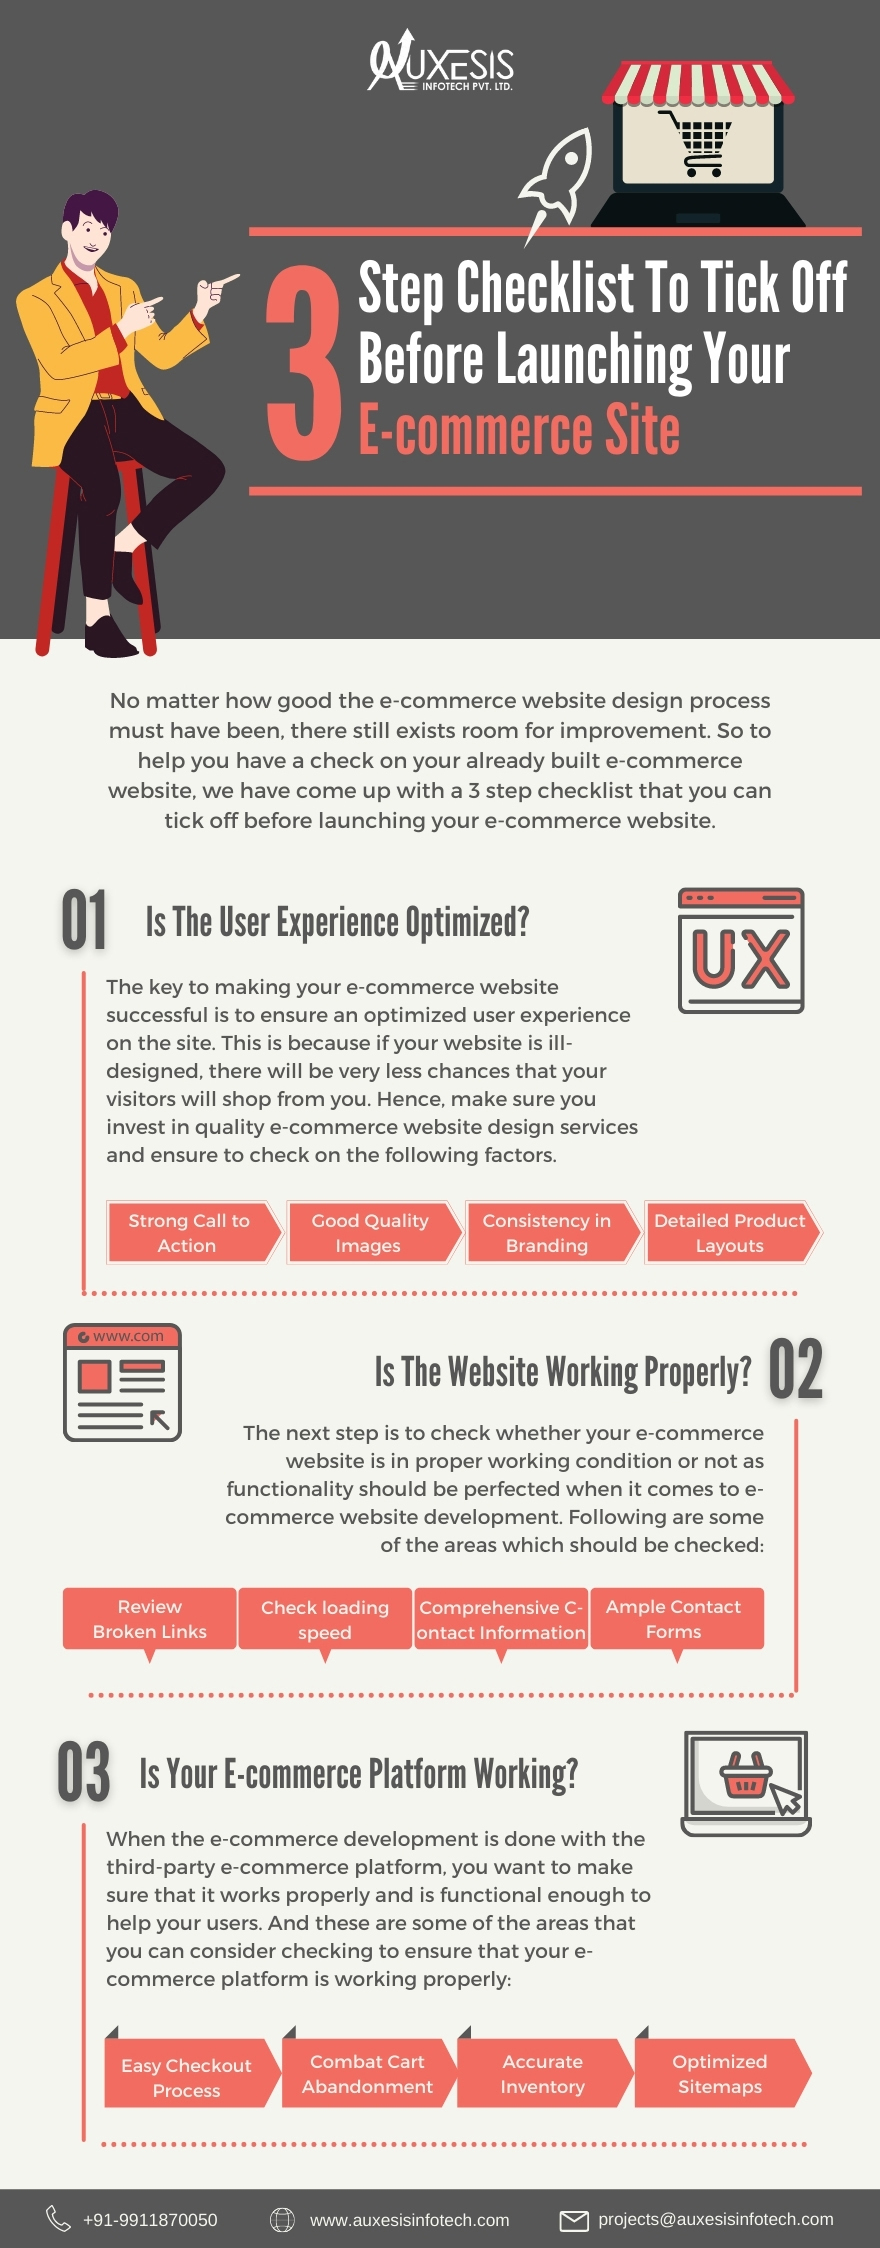 pre-launch checklis for your e-commerce website infographic